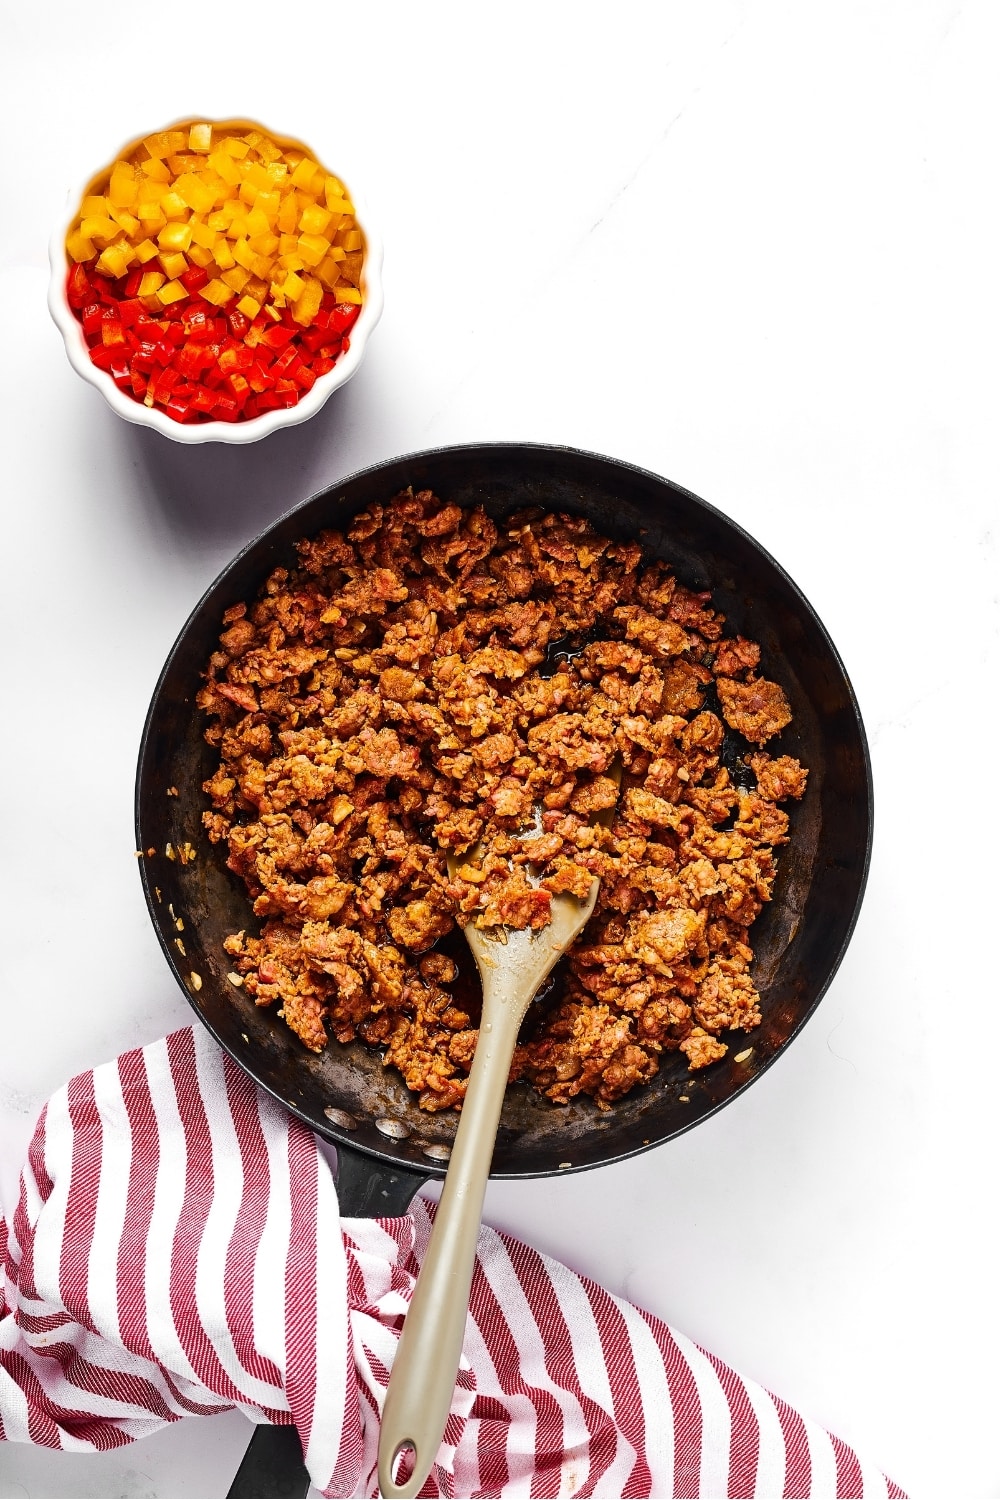 A saute pan with sausage crumbles in it. Behind the pan is a small white bowl with half red peppers and half yellow peppers.